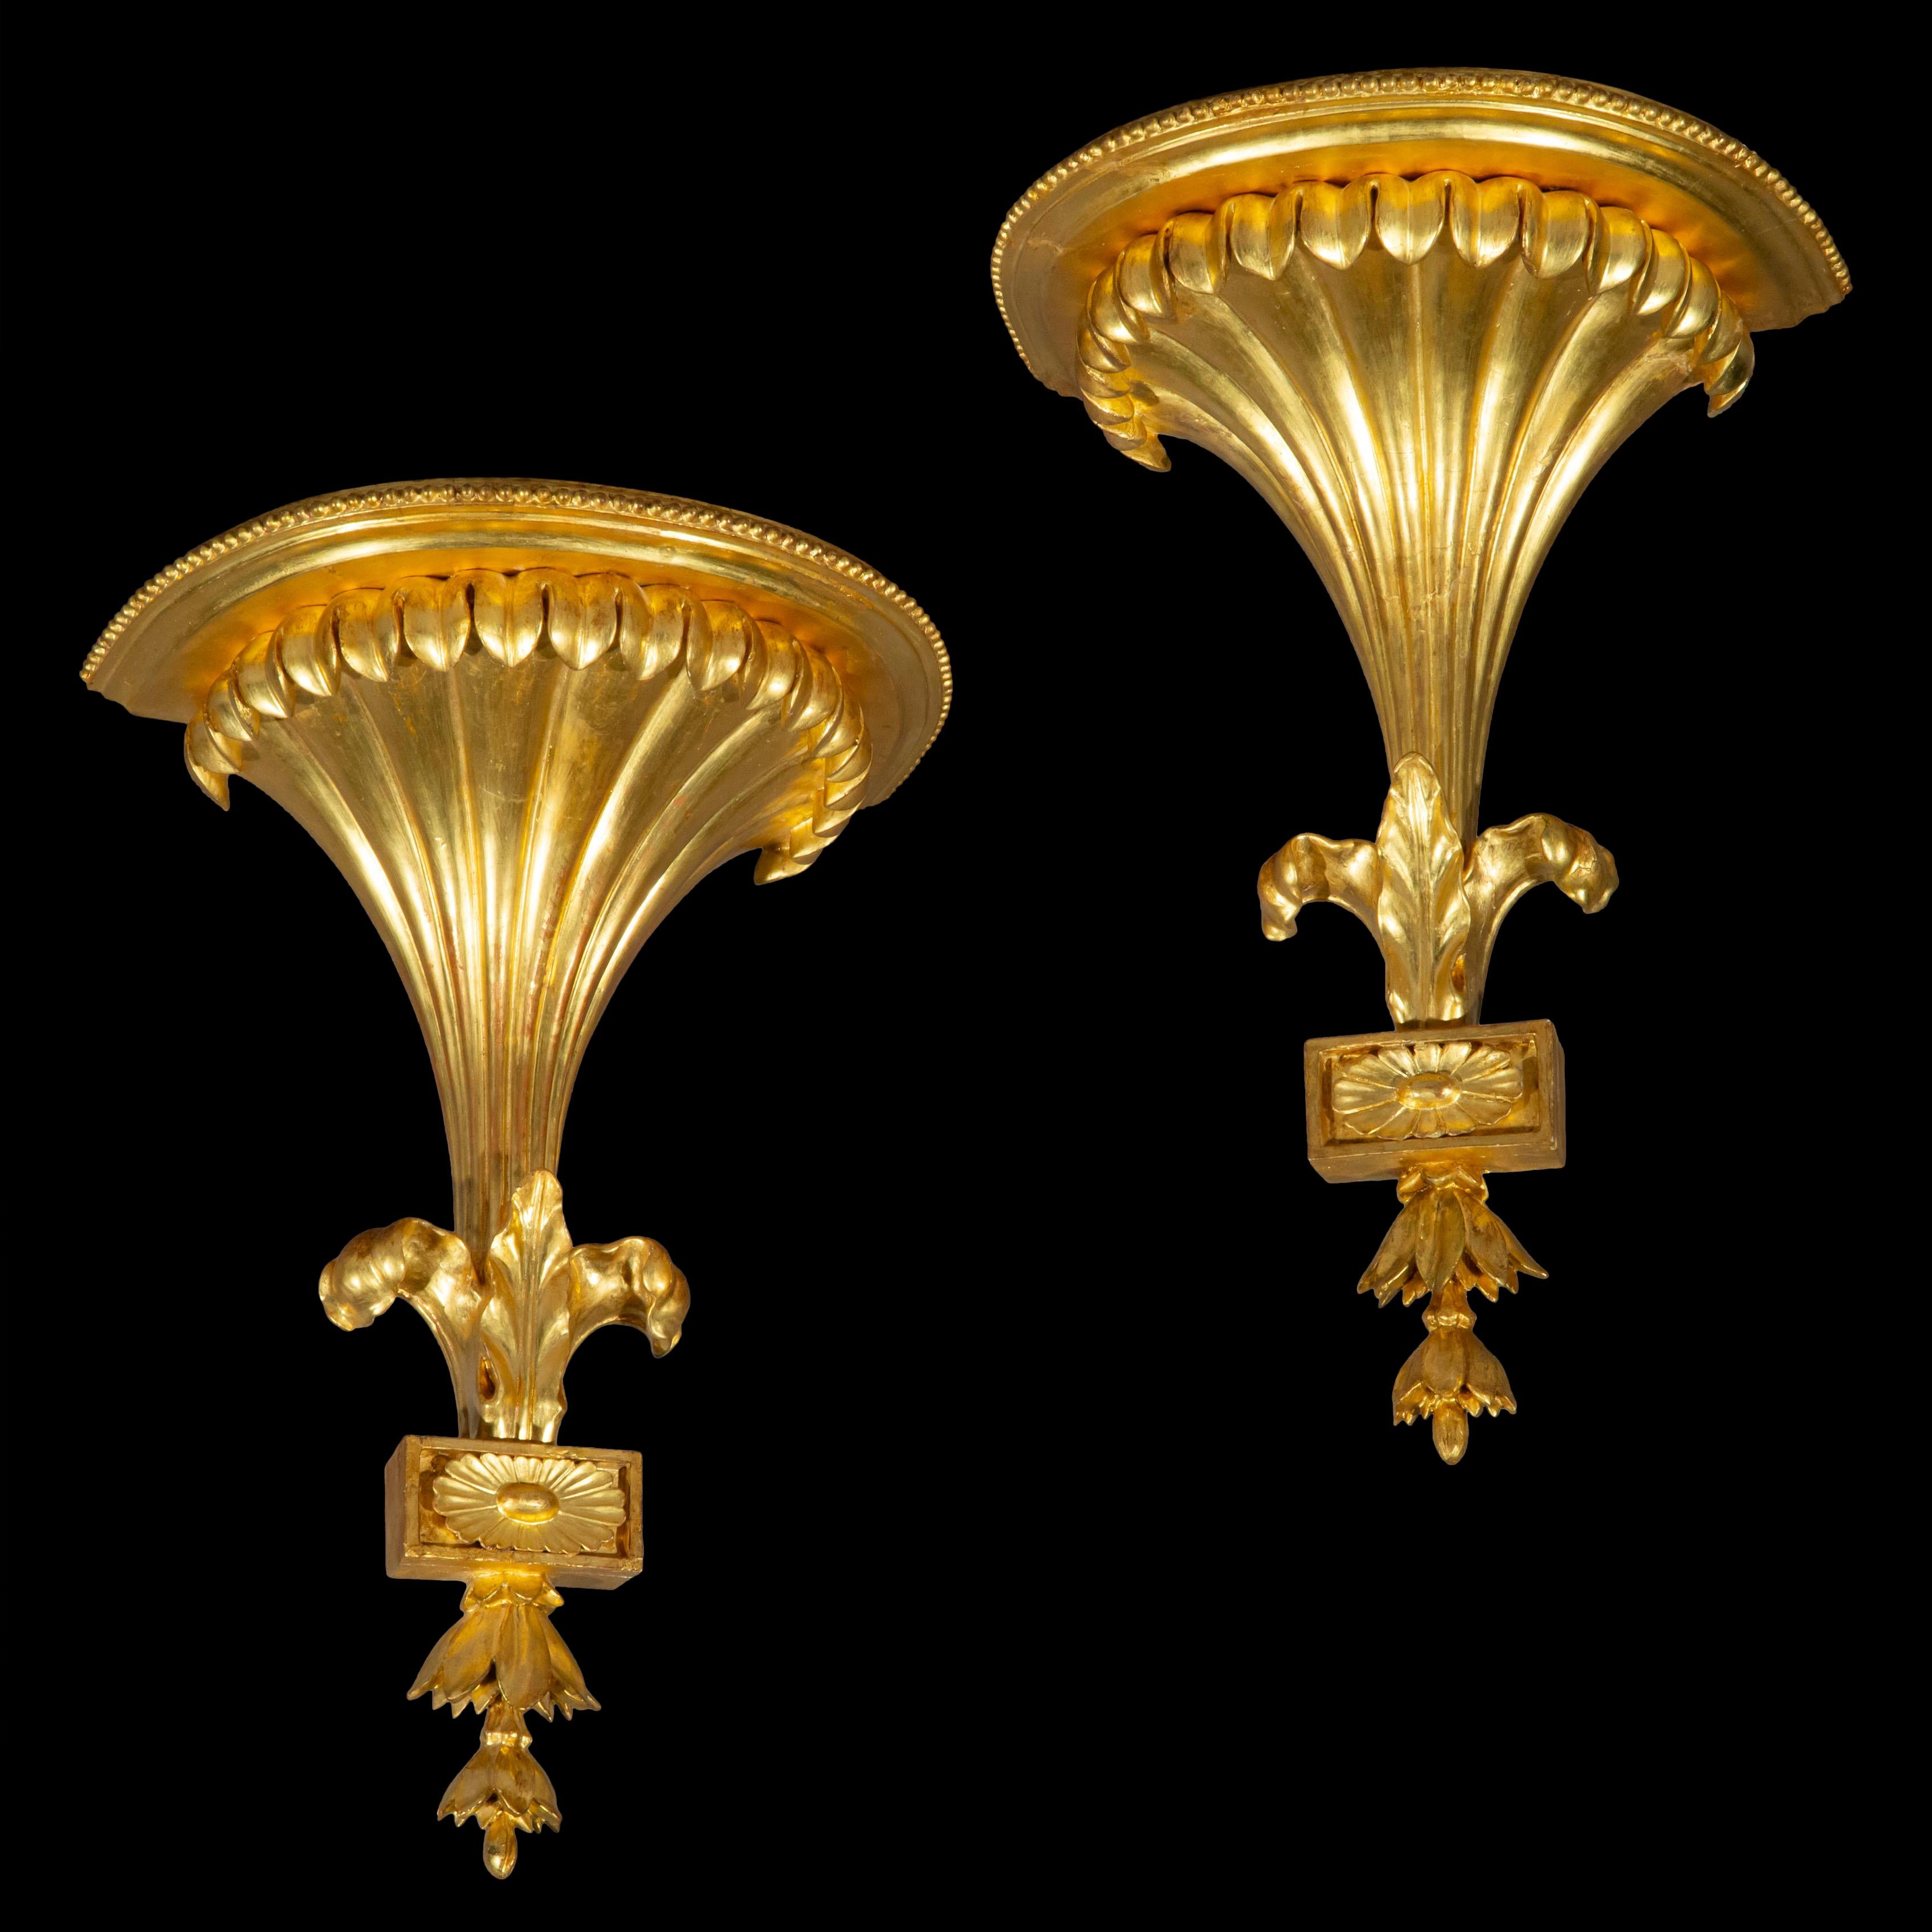 A very fine pair of neoclassical giltwood wall brackets.
English, 19th century.

Why we like them
Wonderfully sculptural, superbly decorative neoclassical design; a splendid accent in a classic or eclectic interior.